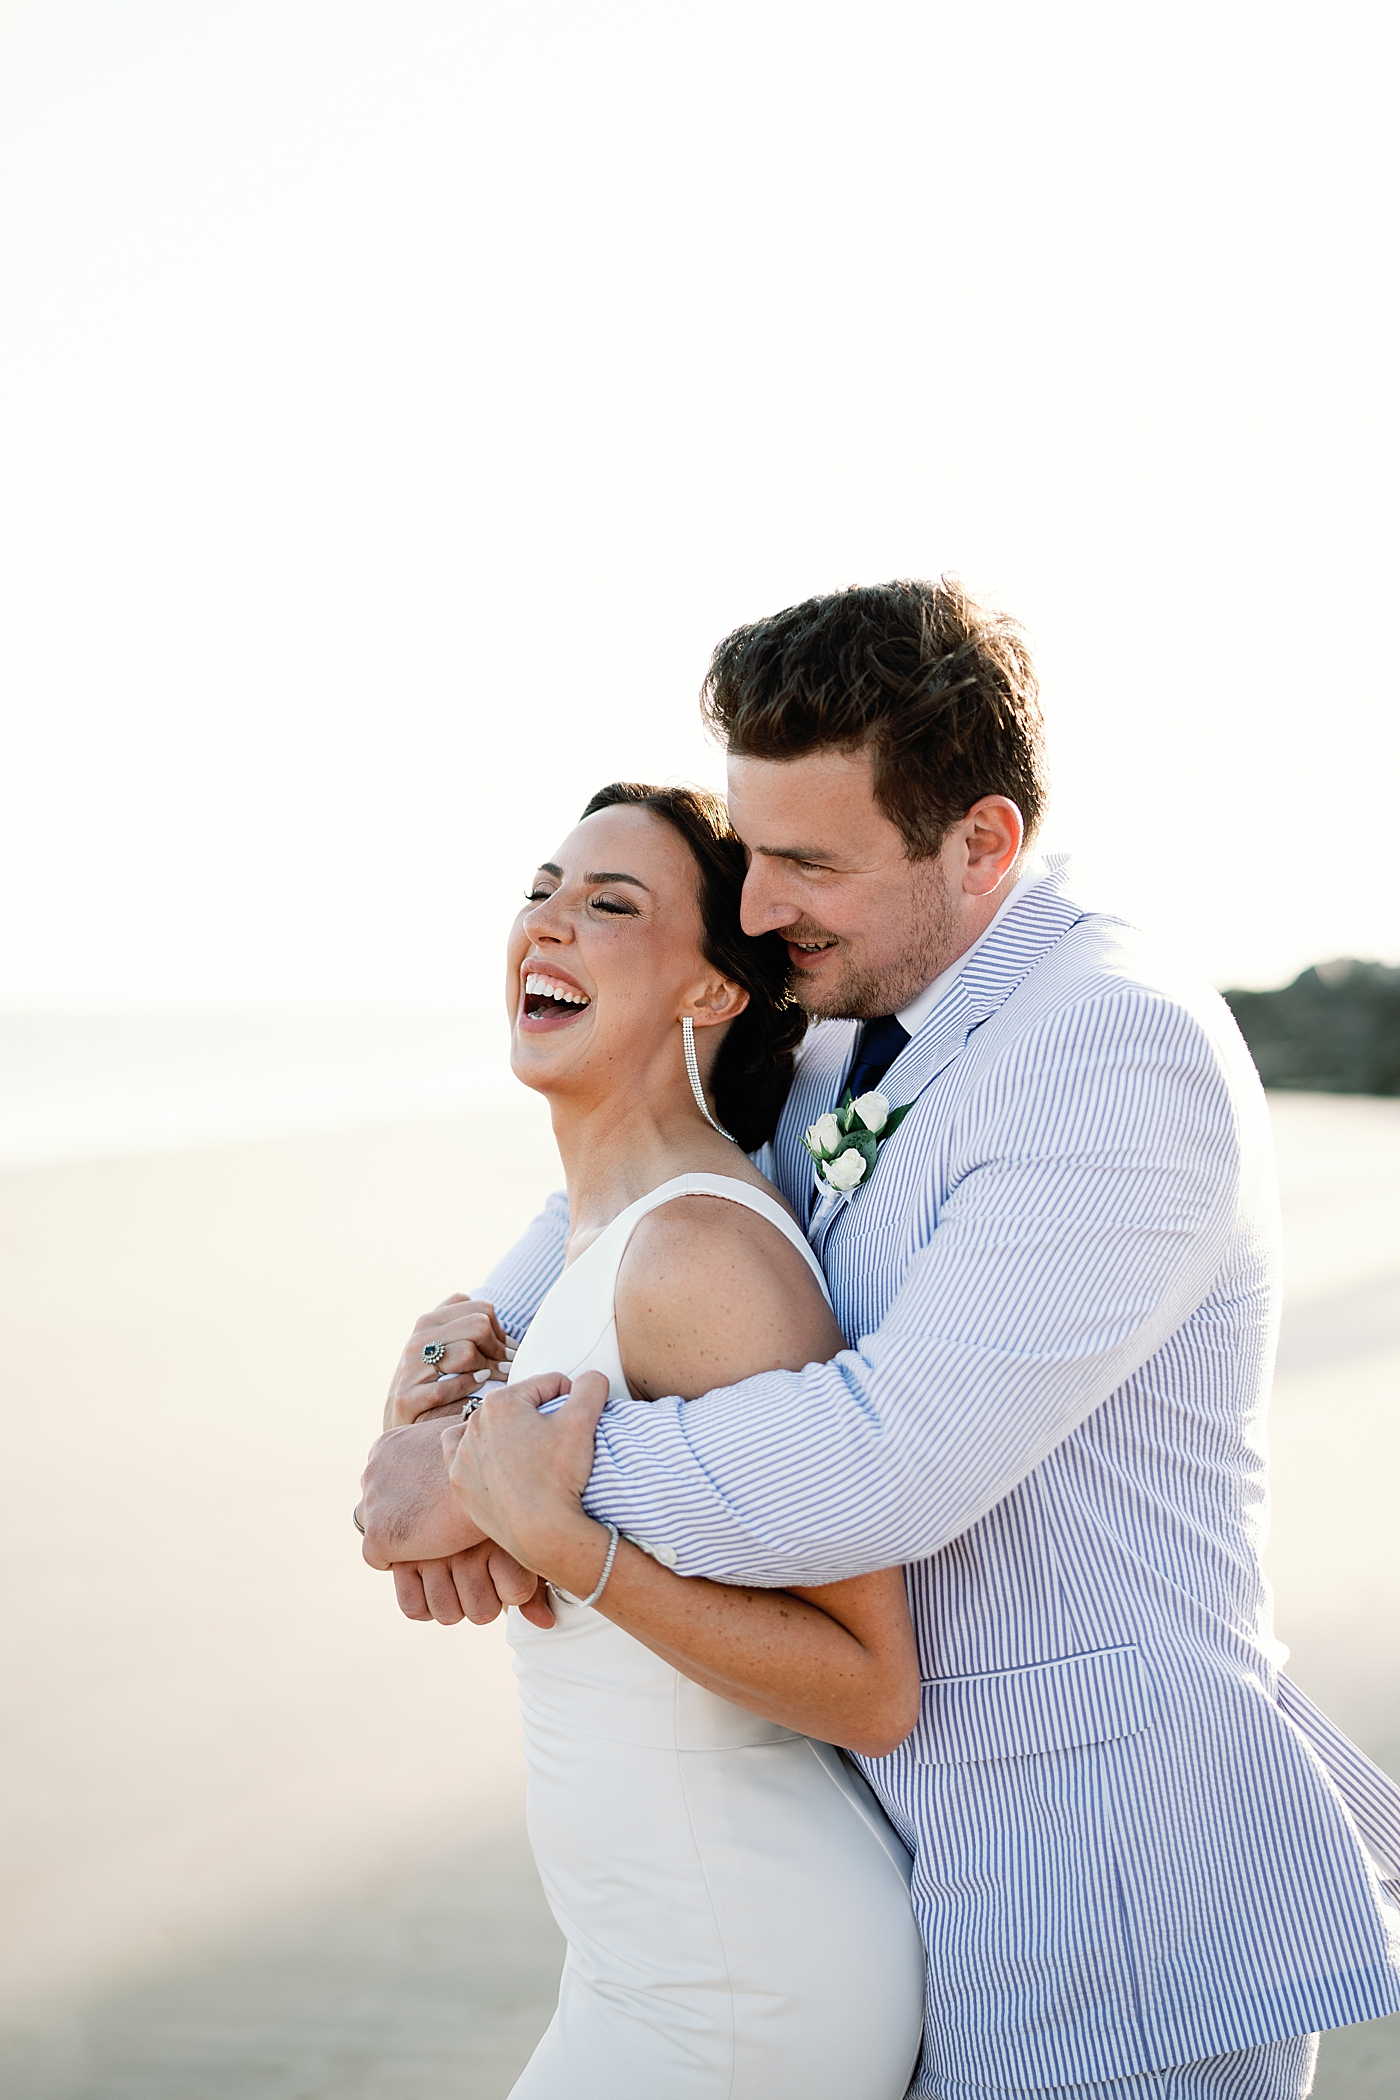 Bride and groom embracing on the beach | Image by Annie Laura Photo